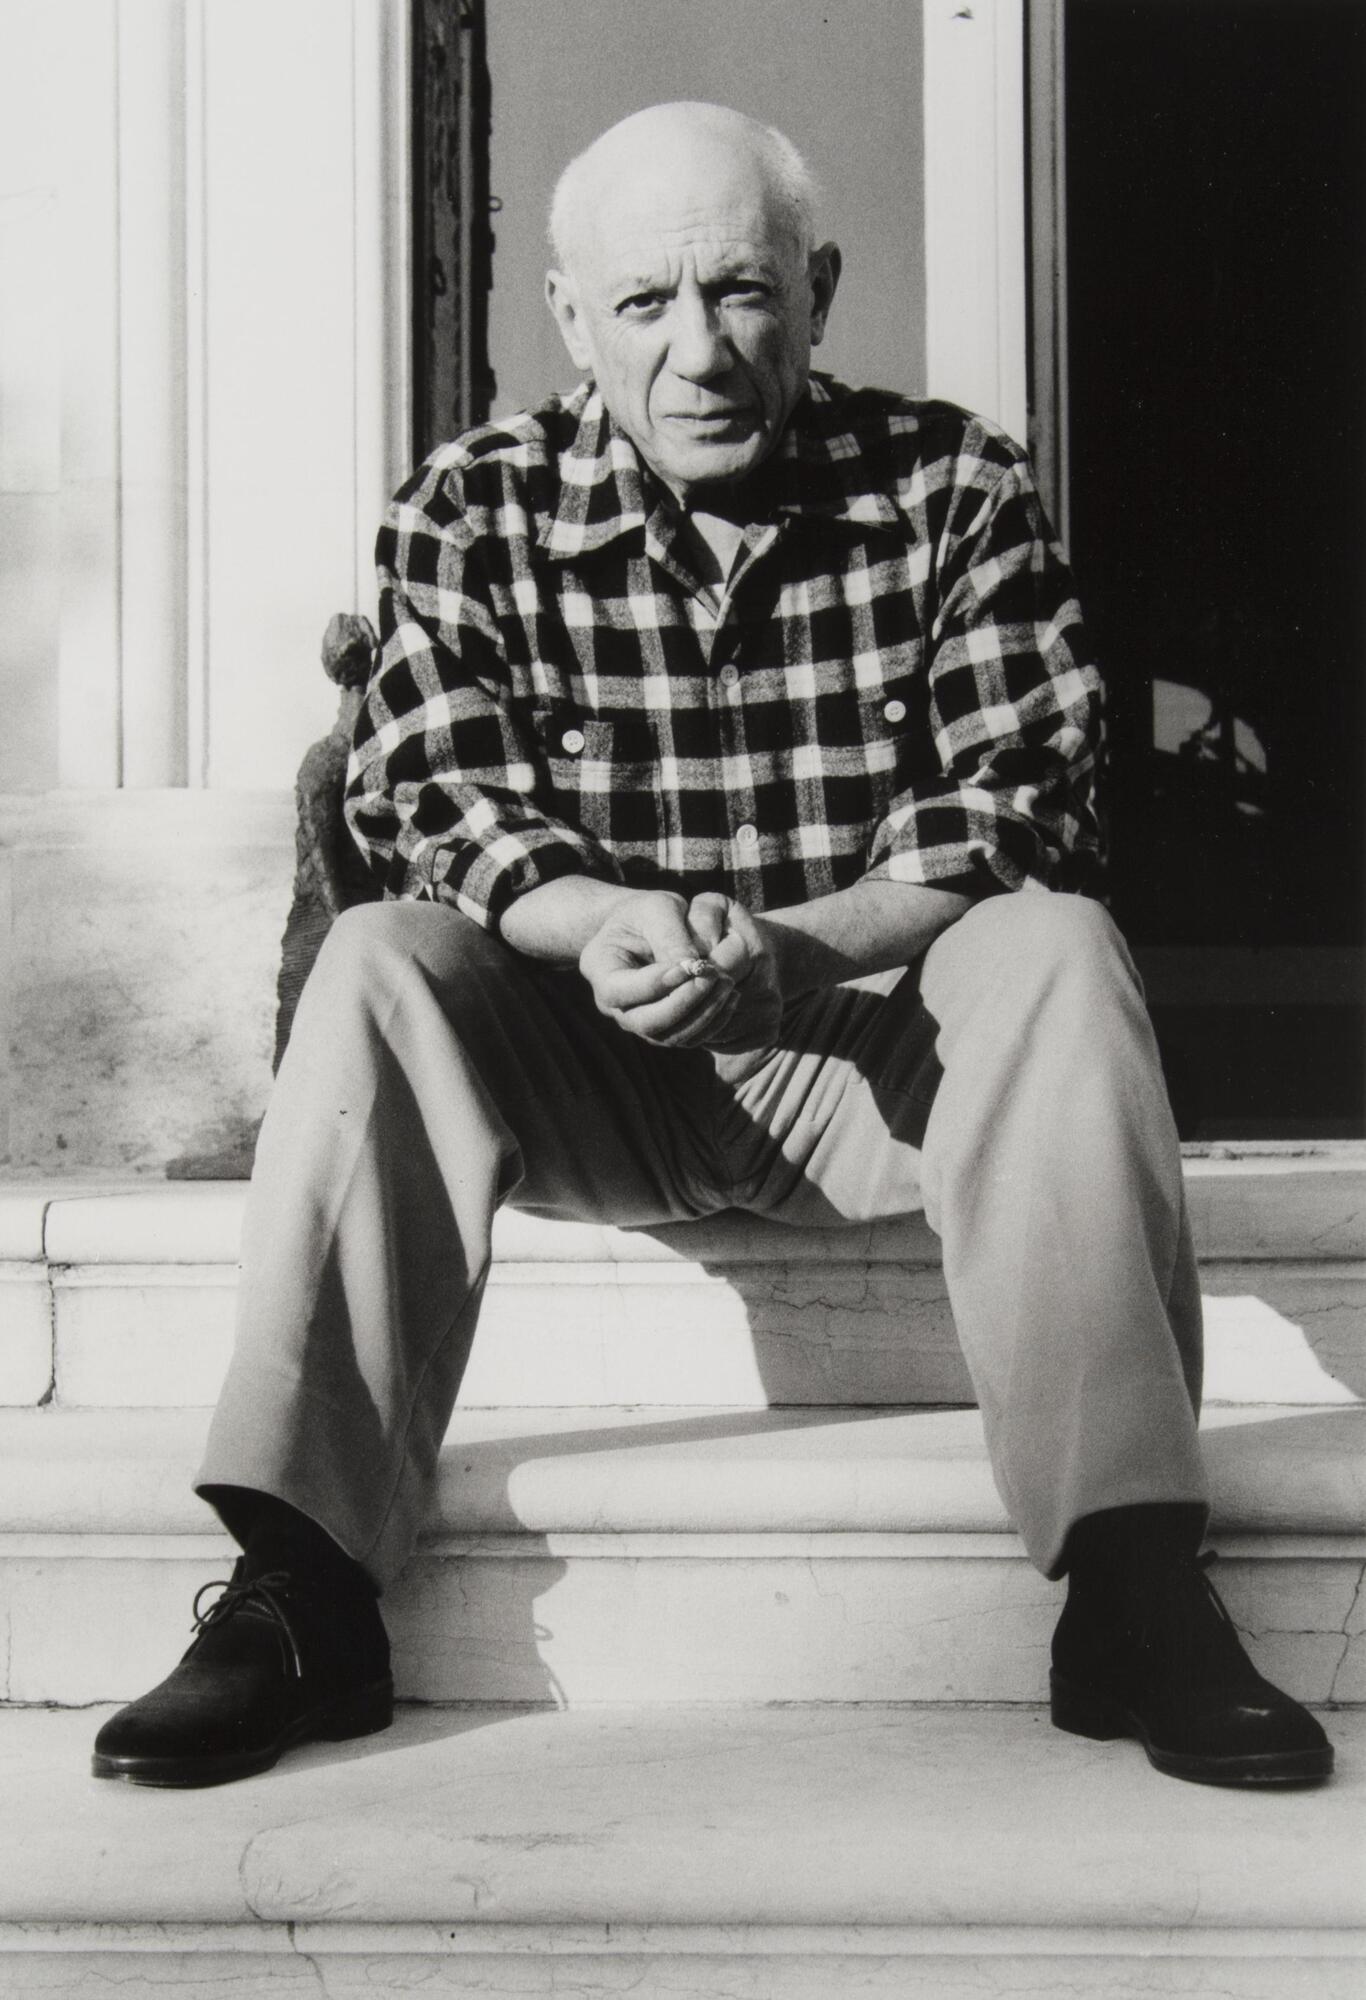 This portrait of a man shows him sitting on a set of steps, hands clasped between his knees. He wears a checkered shirt and long trousers.<br /><br />
EWP, 7/26/16: removed proper name, more appropriately addressed in SM